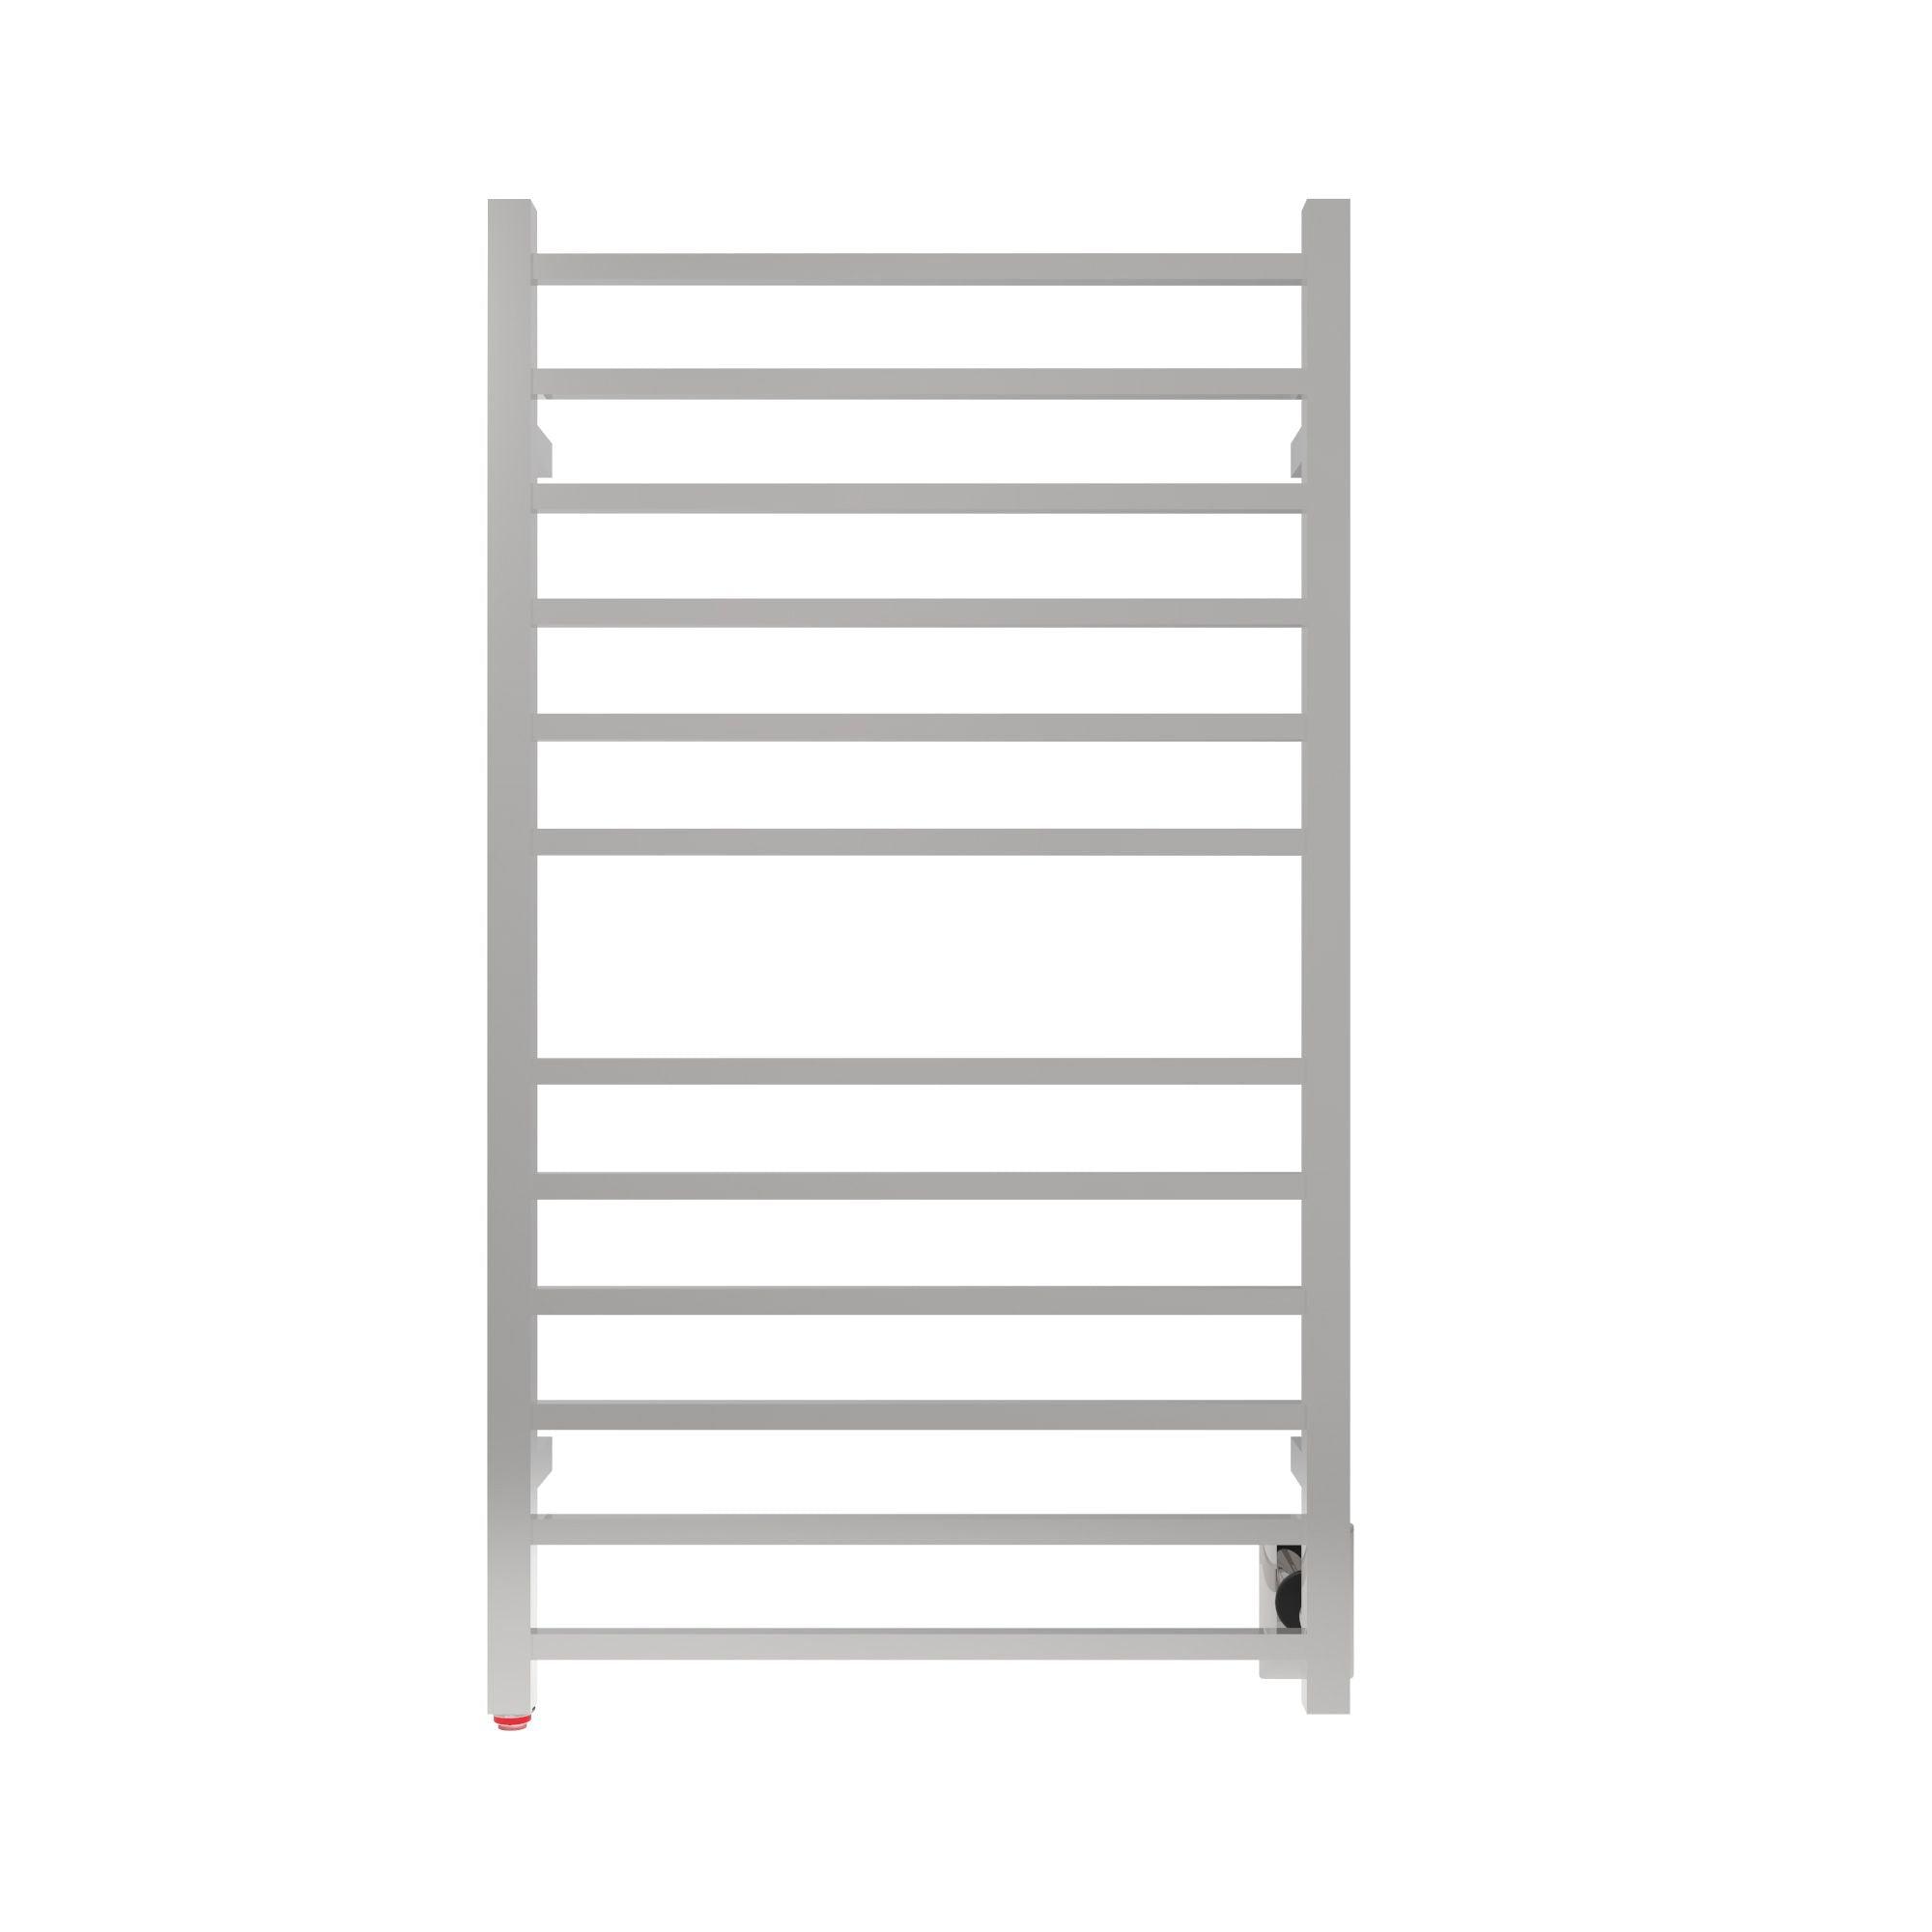 Amba Radiant Large Hardwired Square Towel Warmer - 23.6"w x 41.3"h - towelwarmers